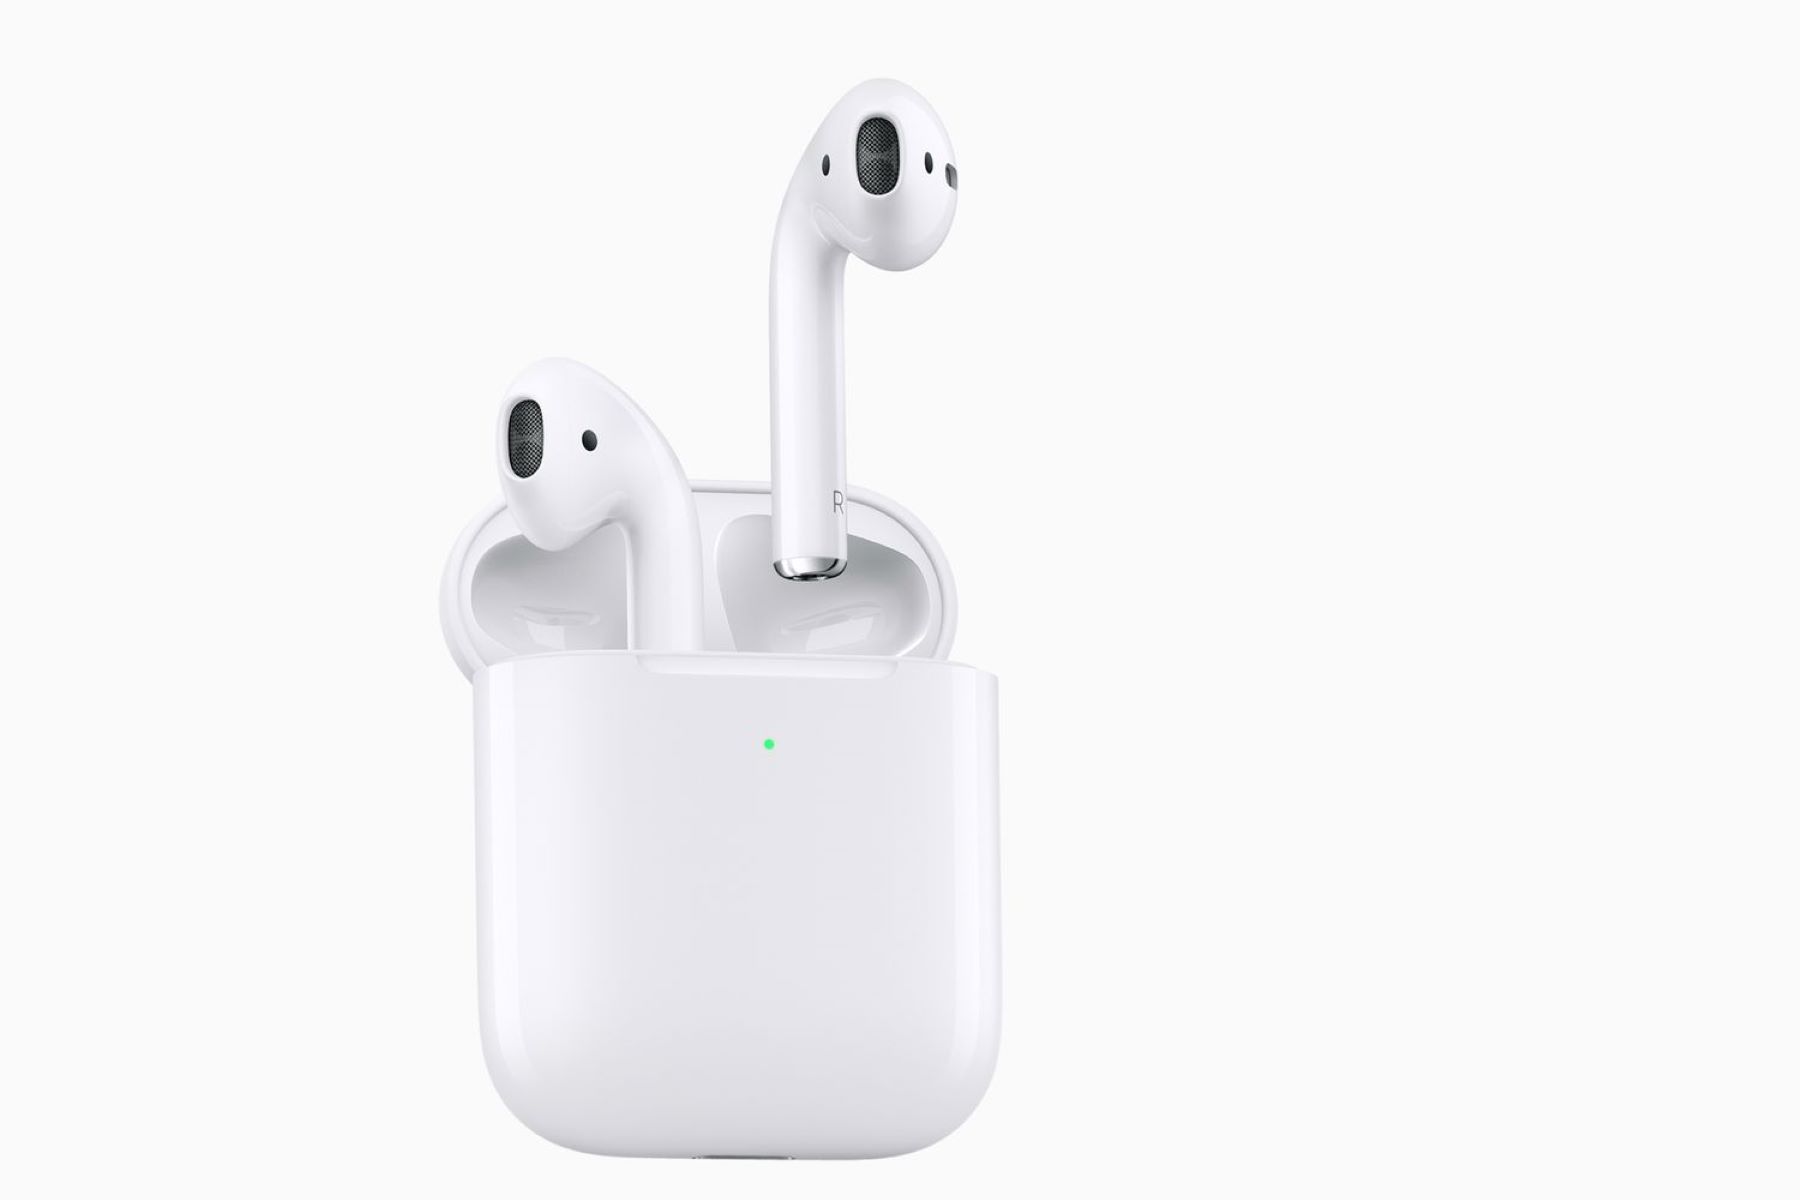 What Are AirPods And How Do They Work?